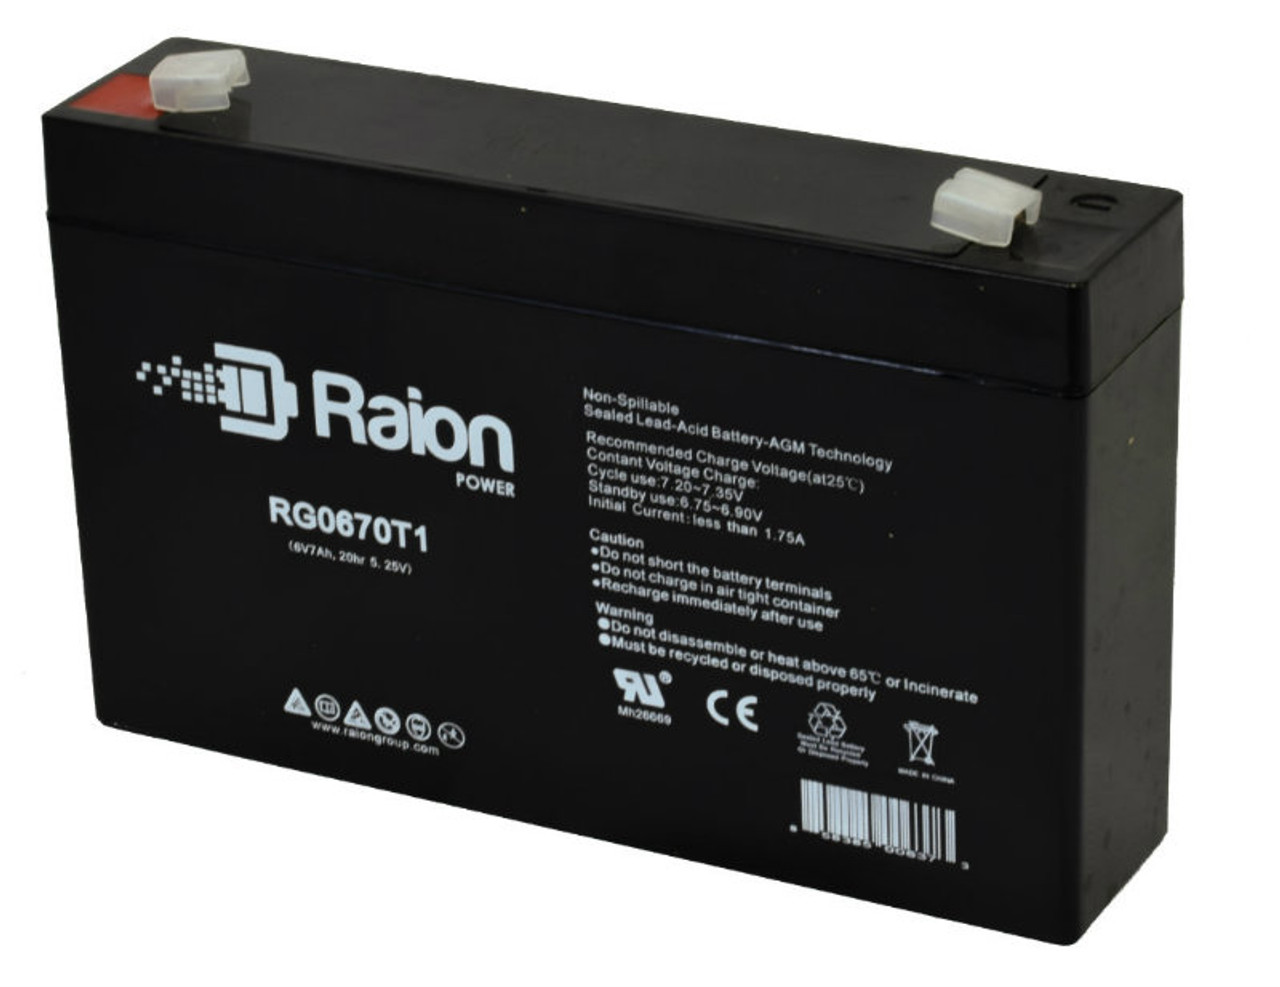 Raion Power RG0670T1 6V 7Ah Replacement Emergency Lighting Battery for Light Alarms 2RCI